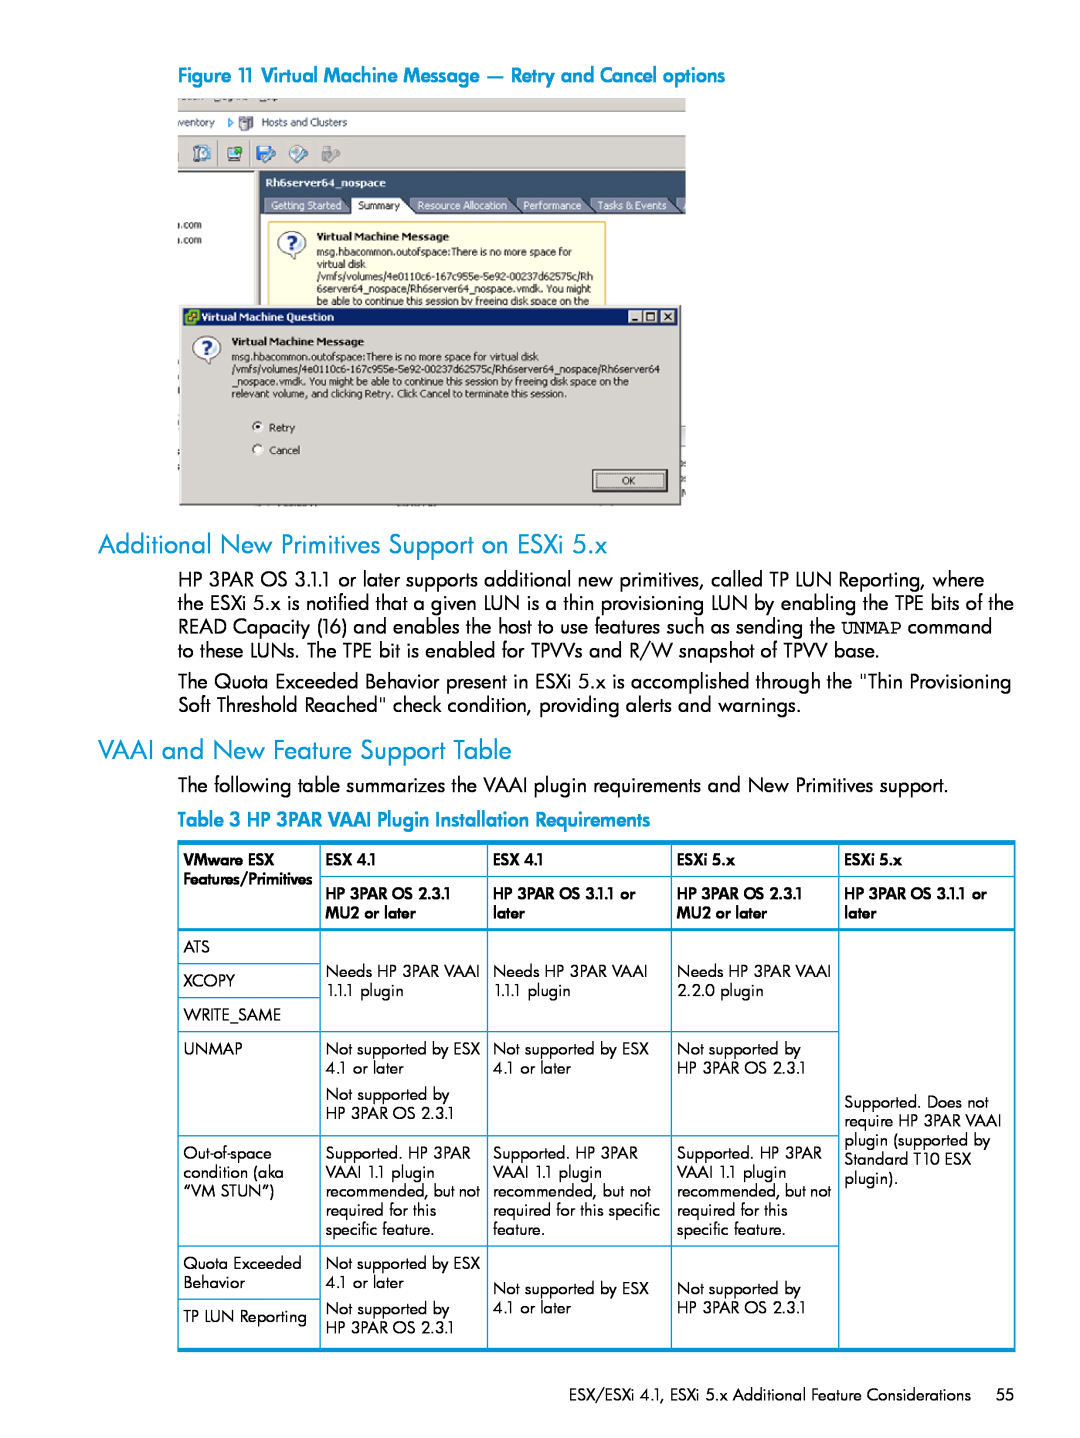 HP QR516B manual Additional New Primitives Support on ESXi, VAAI and New Feature Support Table 